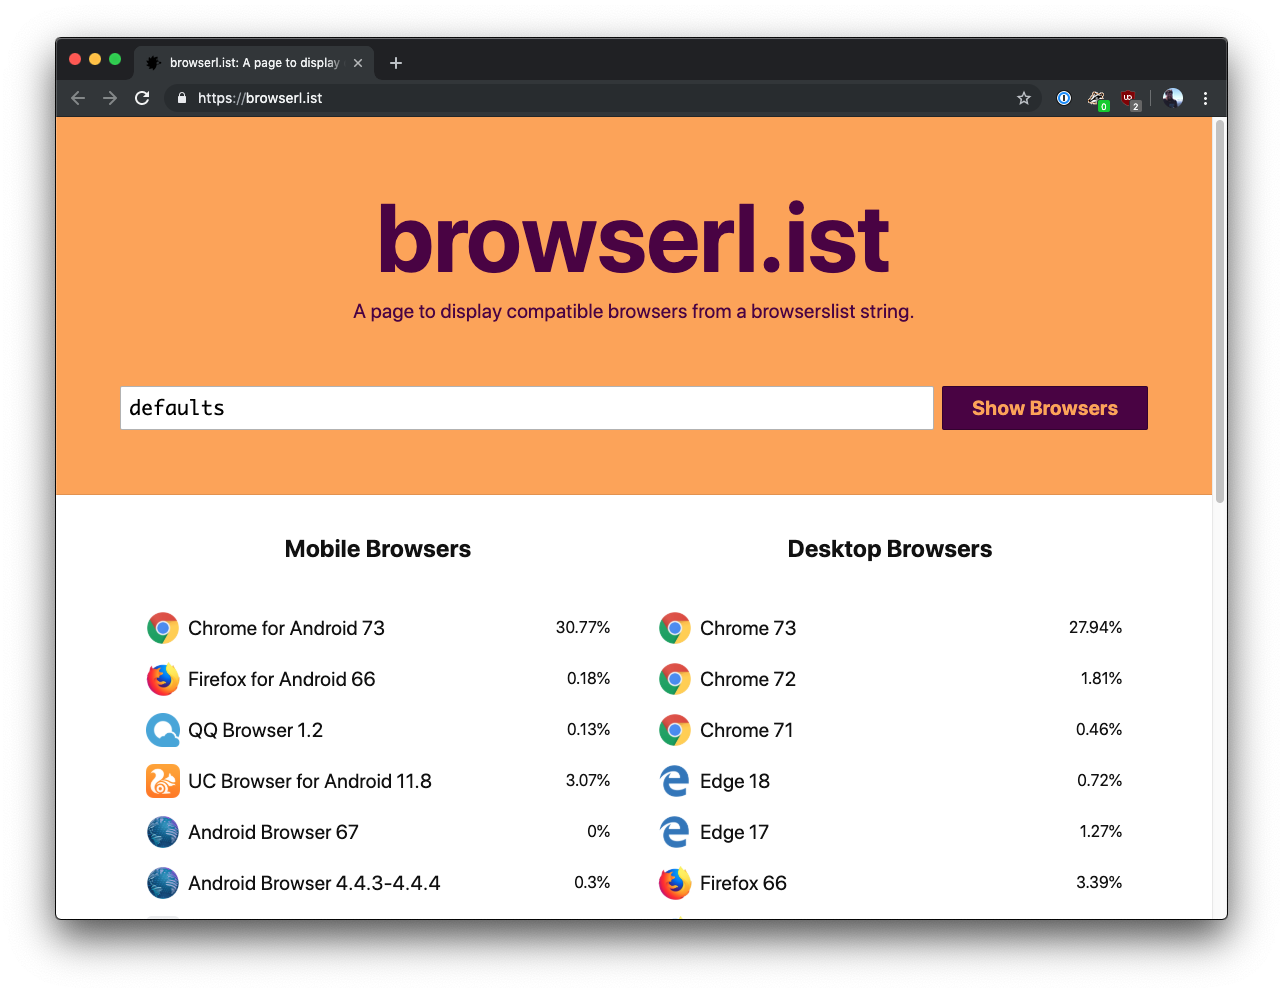 Testing browserslist defaults queries in the browser